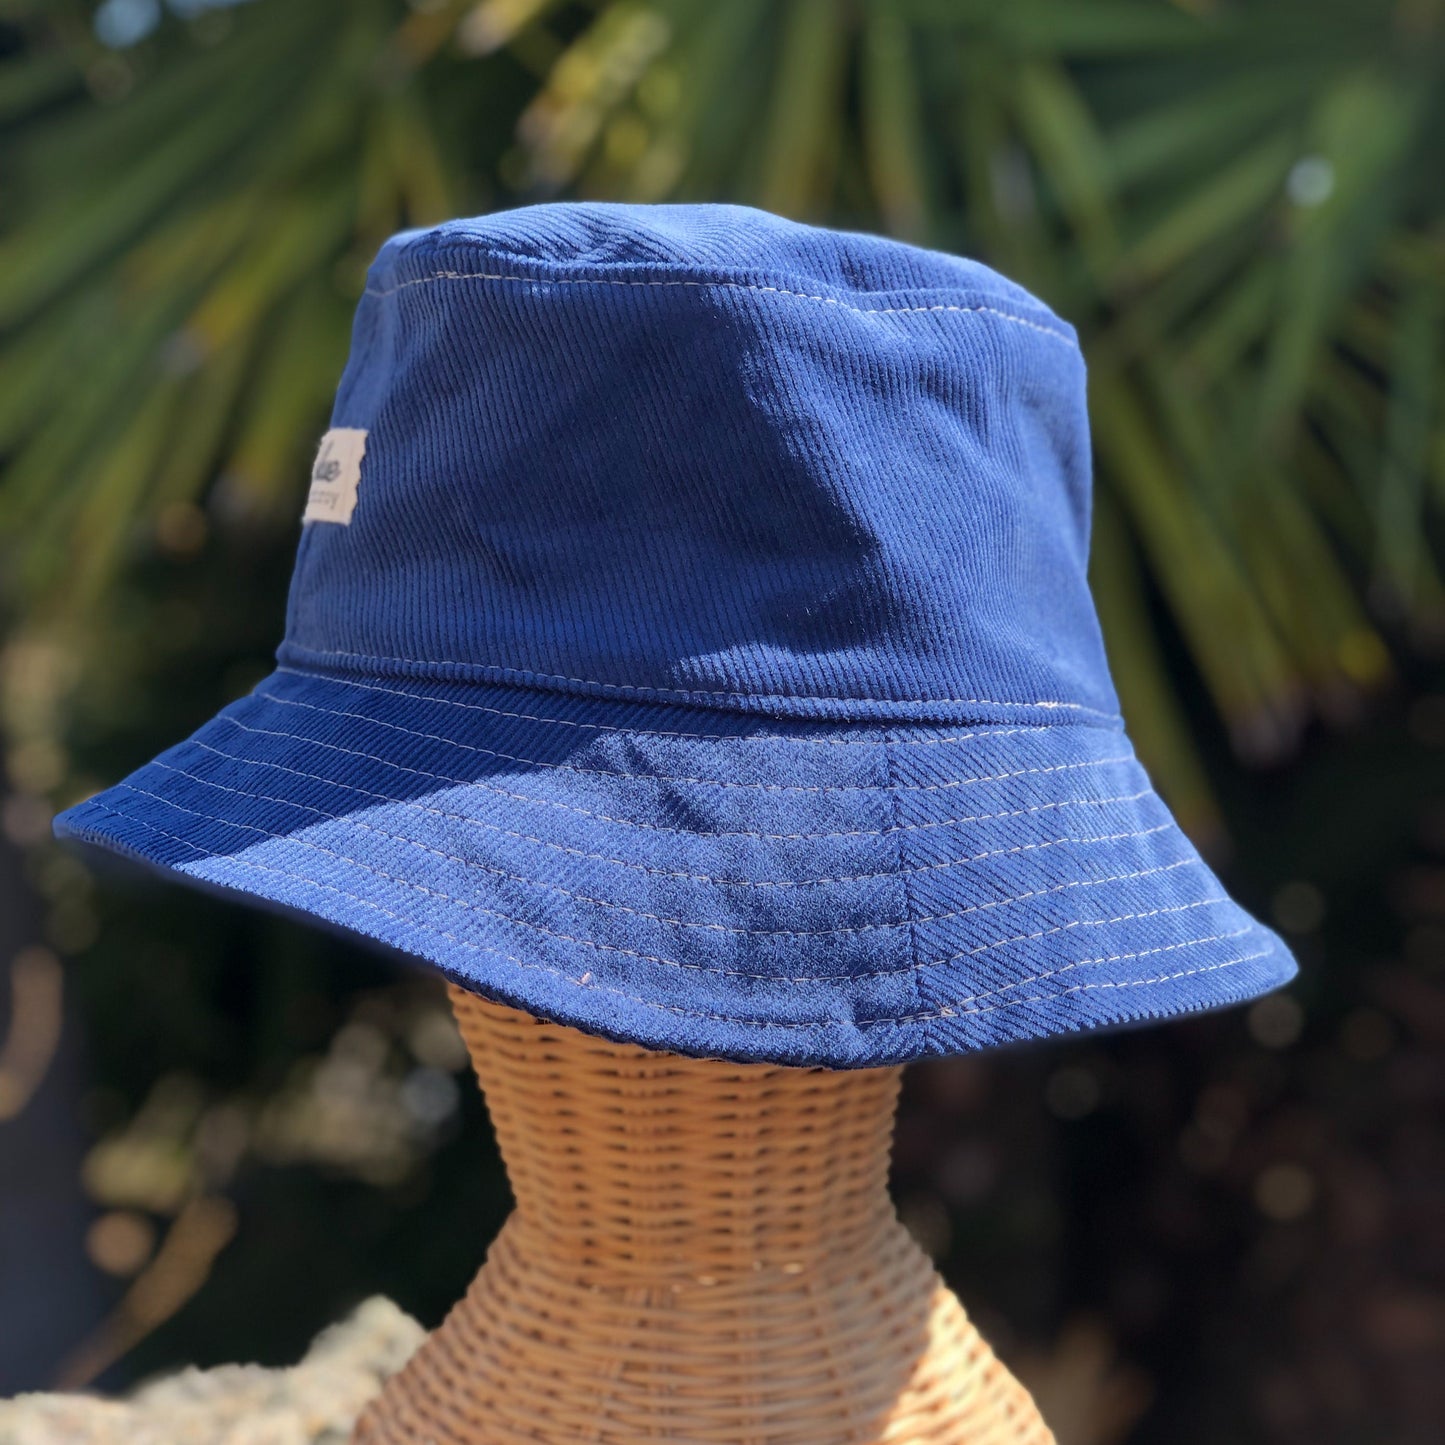 Family Bucket Hats, Mommy and Me Matching Hats, Blue Corduroy Hat, Family Beach Day Accessories, Newborn Shower Gift, Dad and Son Sun Hats